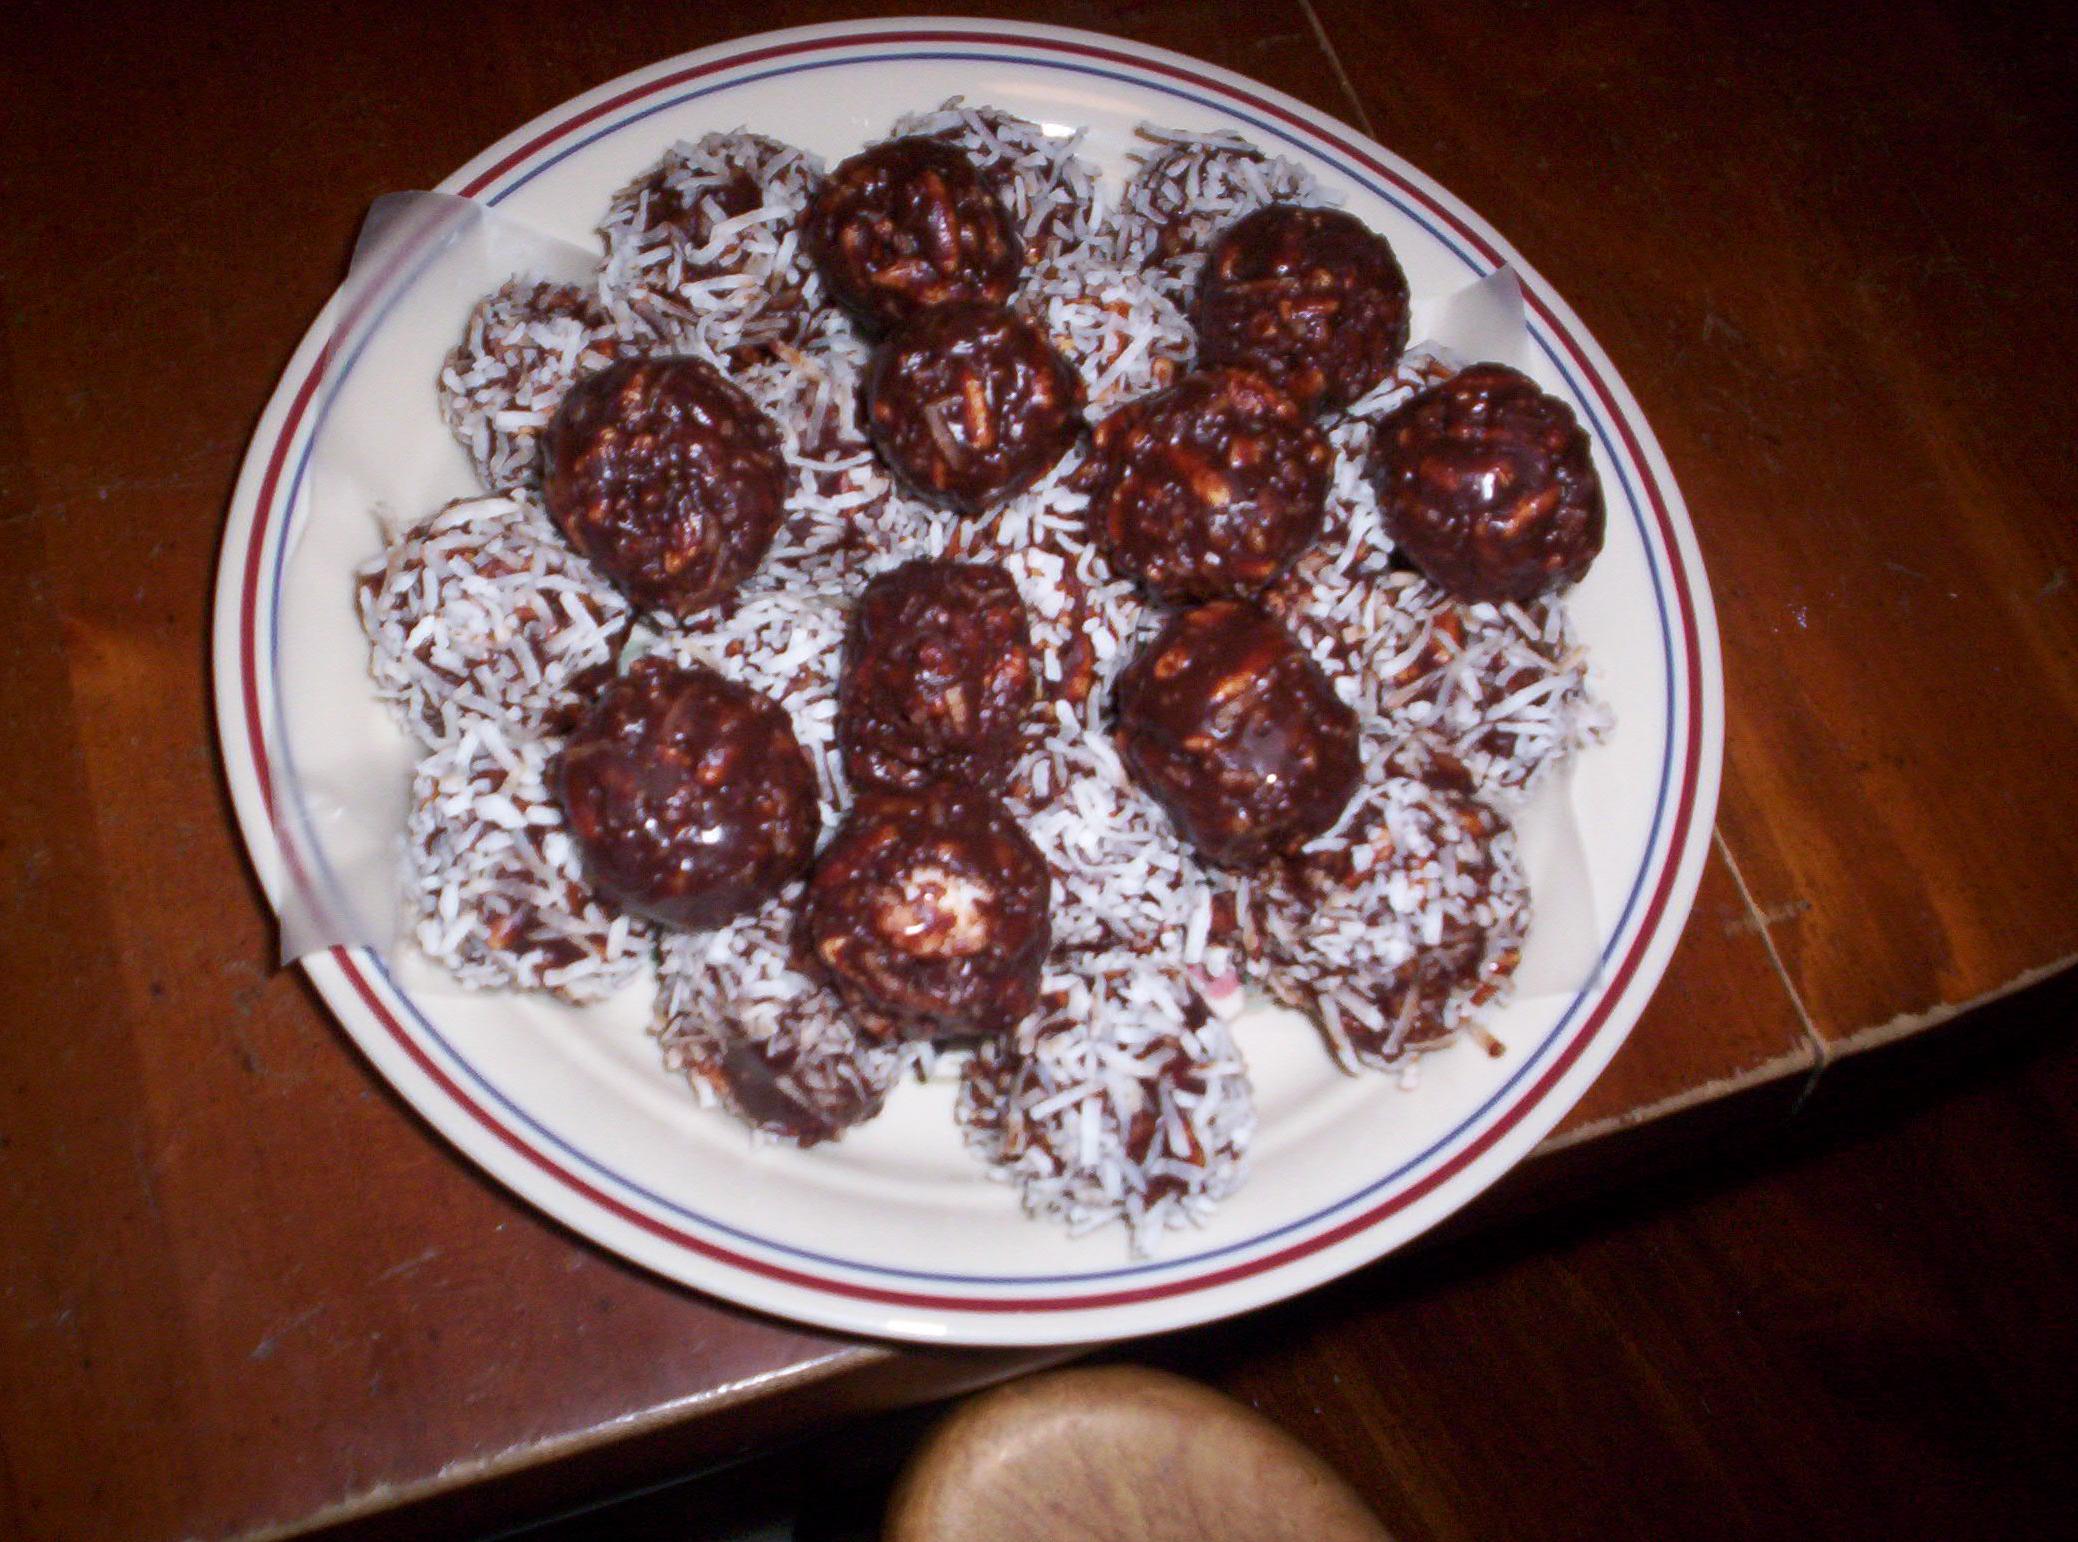  Get ready to indulge in these gluten-free chocolate balls!